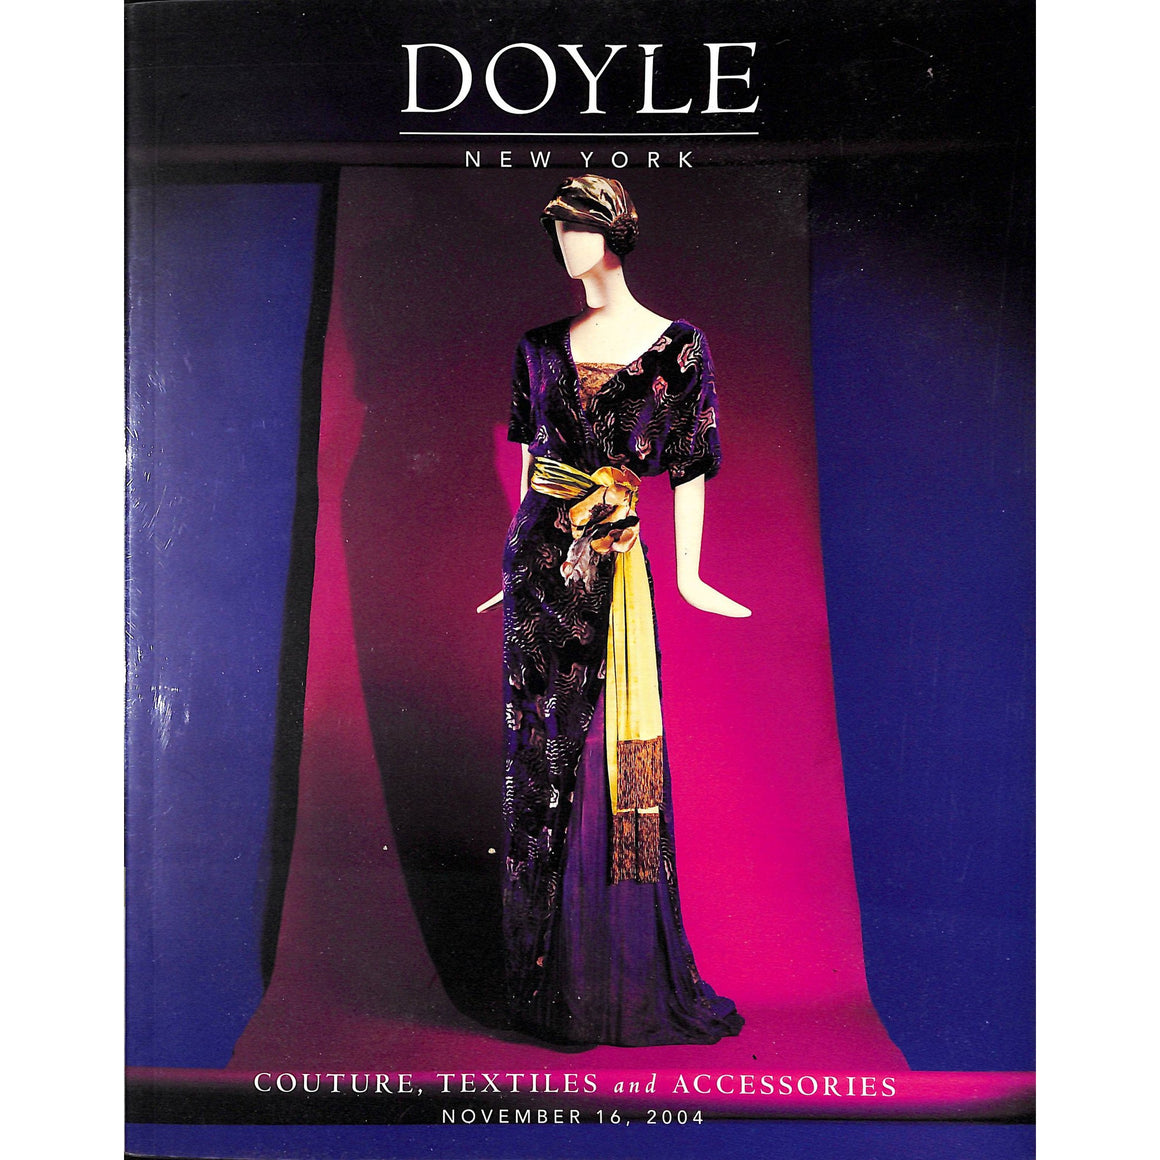 Doyle New York Couture, Textiles and Accessories